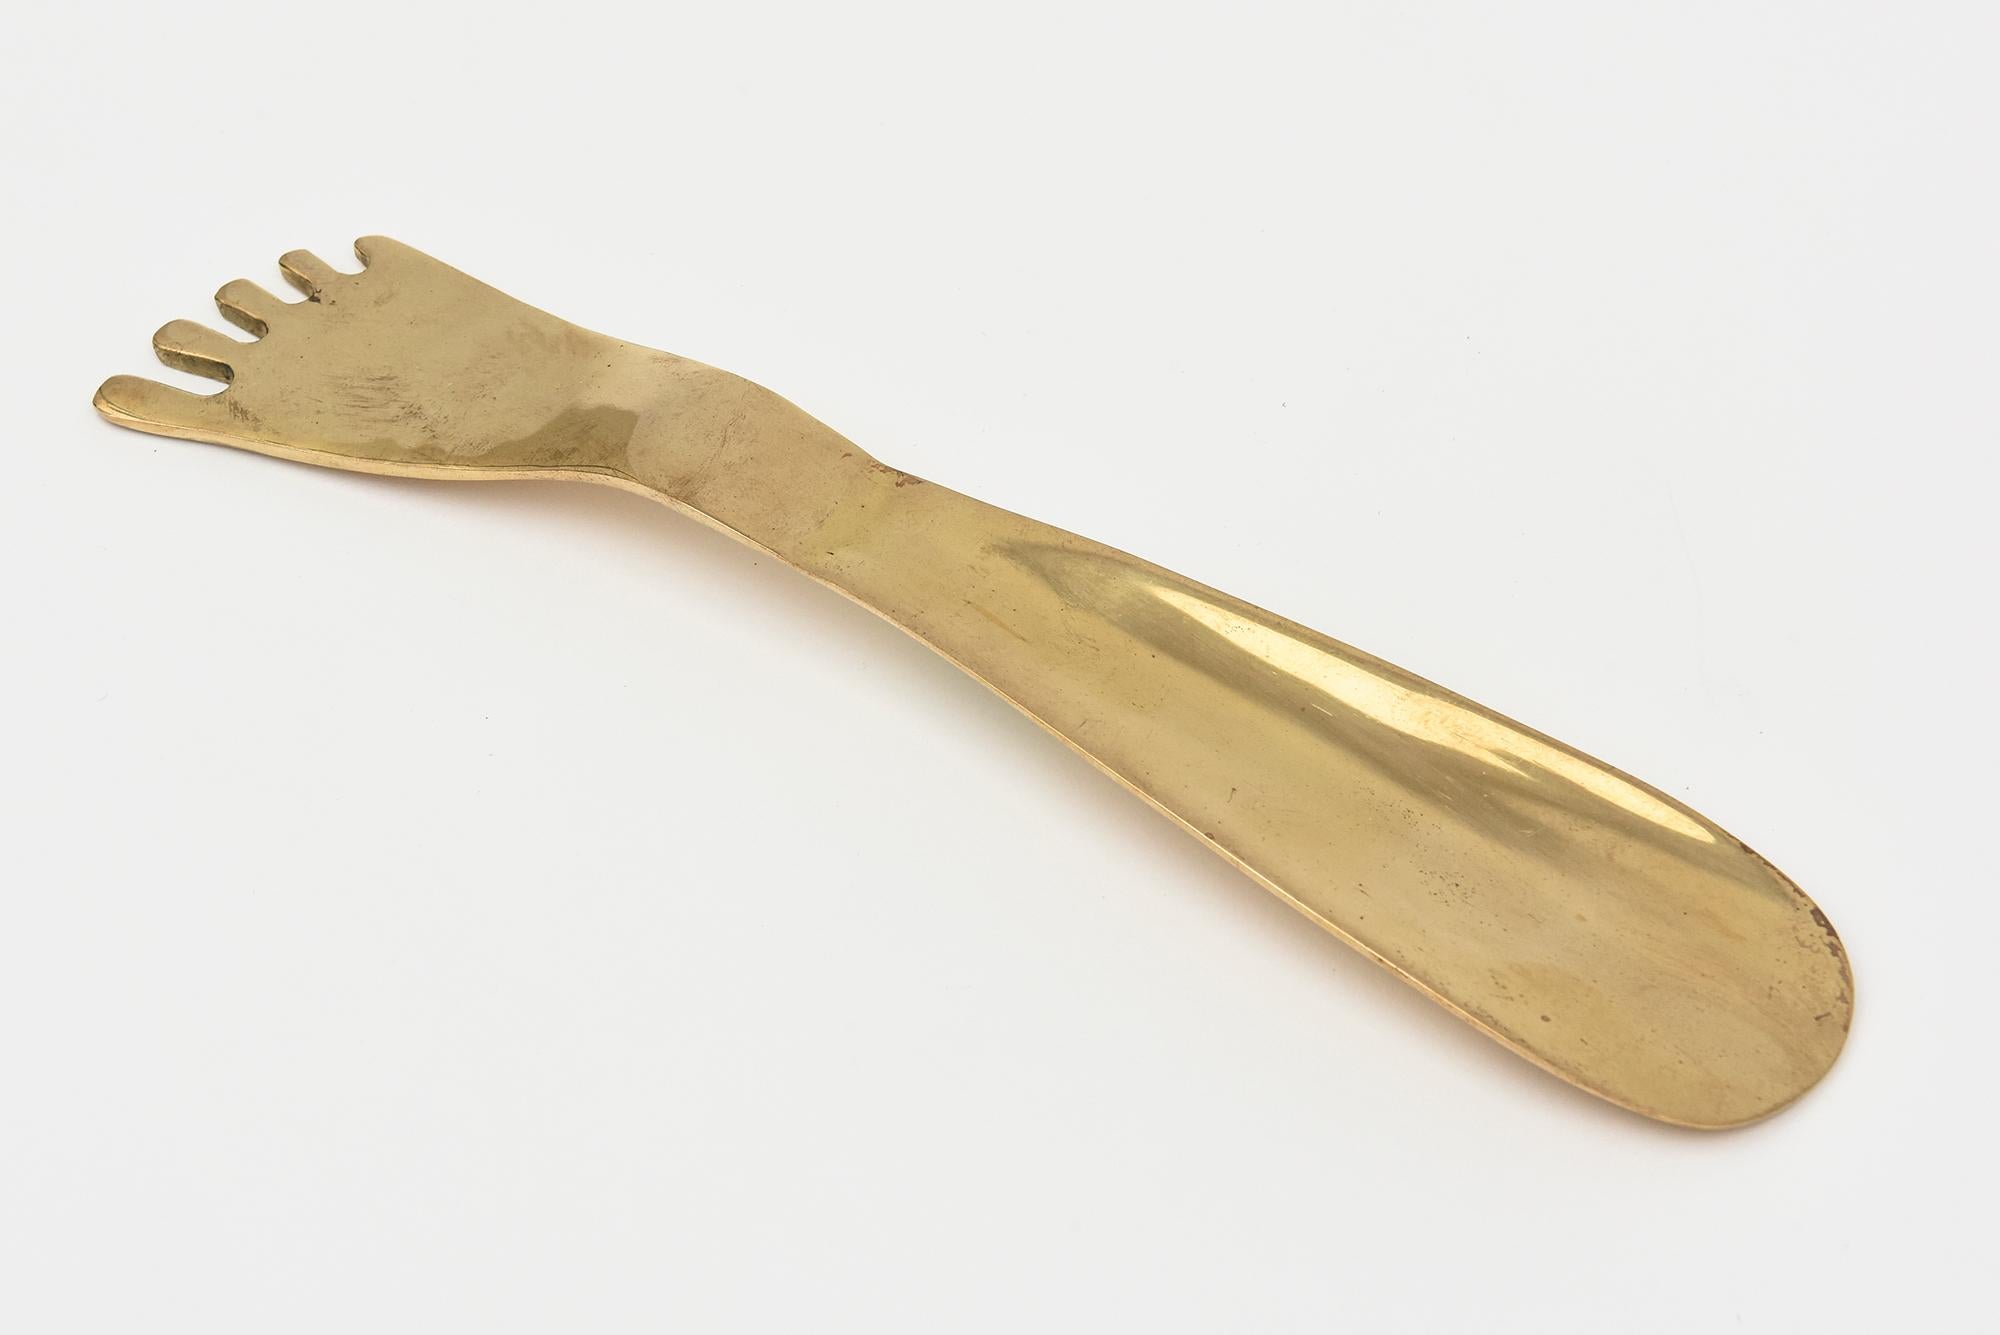 This whimsical 1970's signed brass foot shoe horn is by Taste Sellar Sigma as shown in the photos. The company is Taste Setter by Sigma. It is unisex and in original vintage condition not recently polished. This will make a fun gift! PLEASE NOTE: